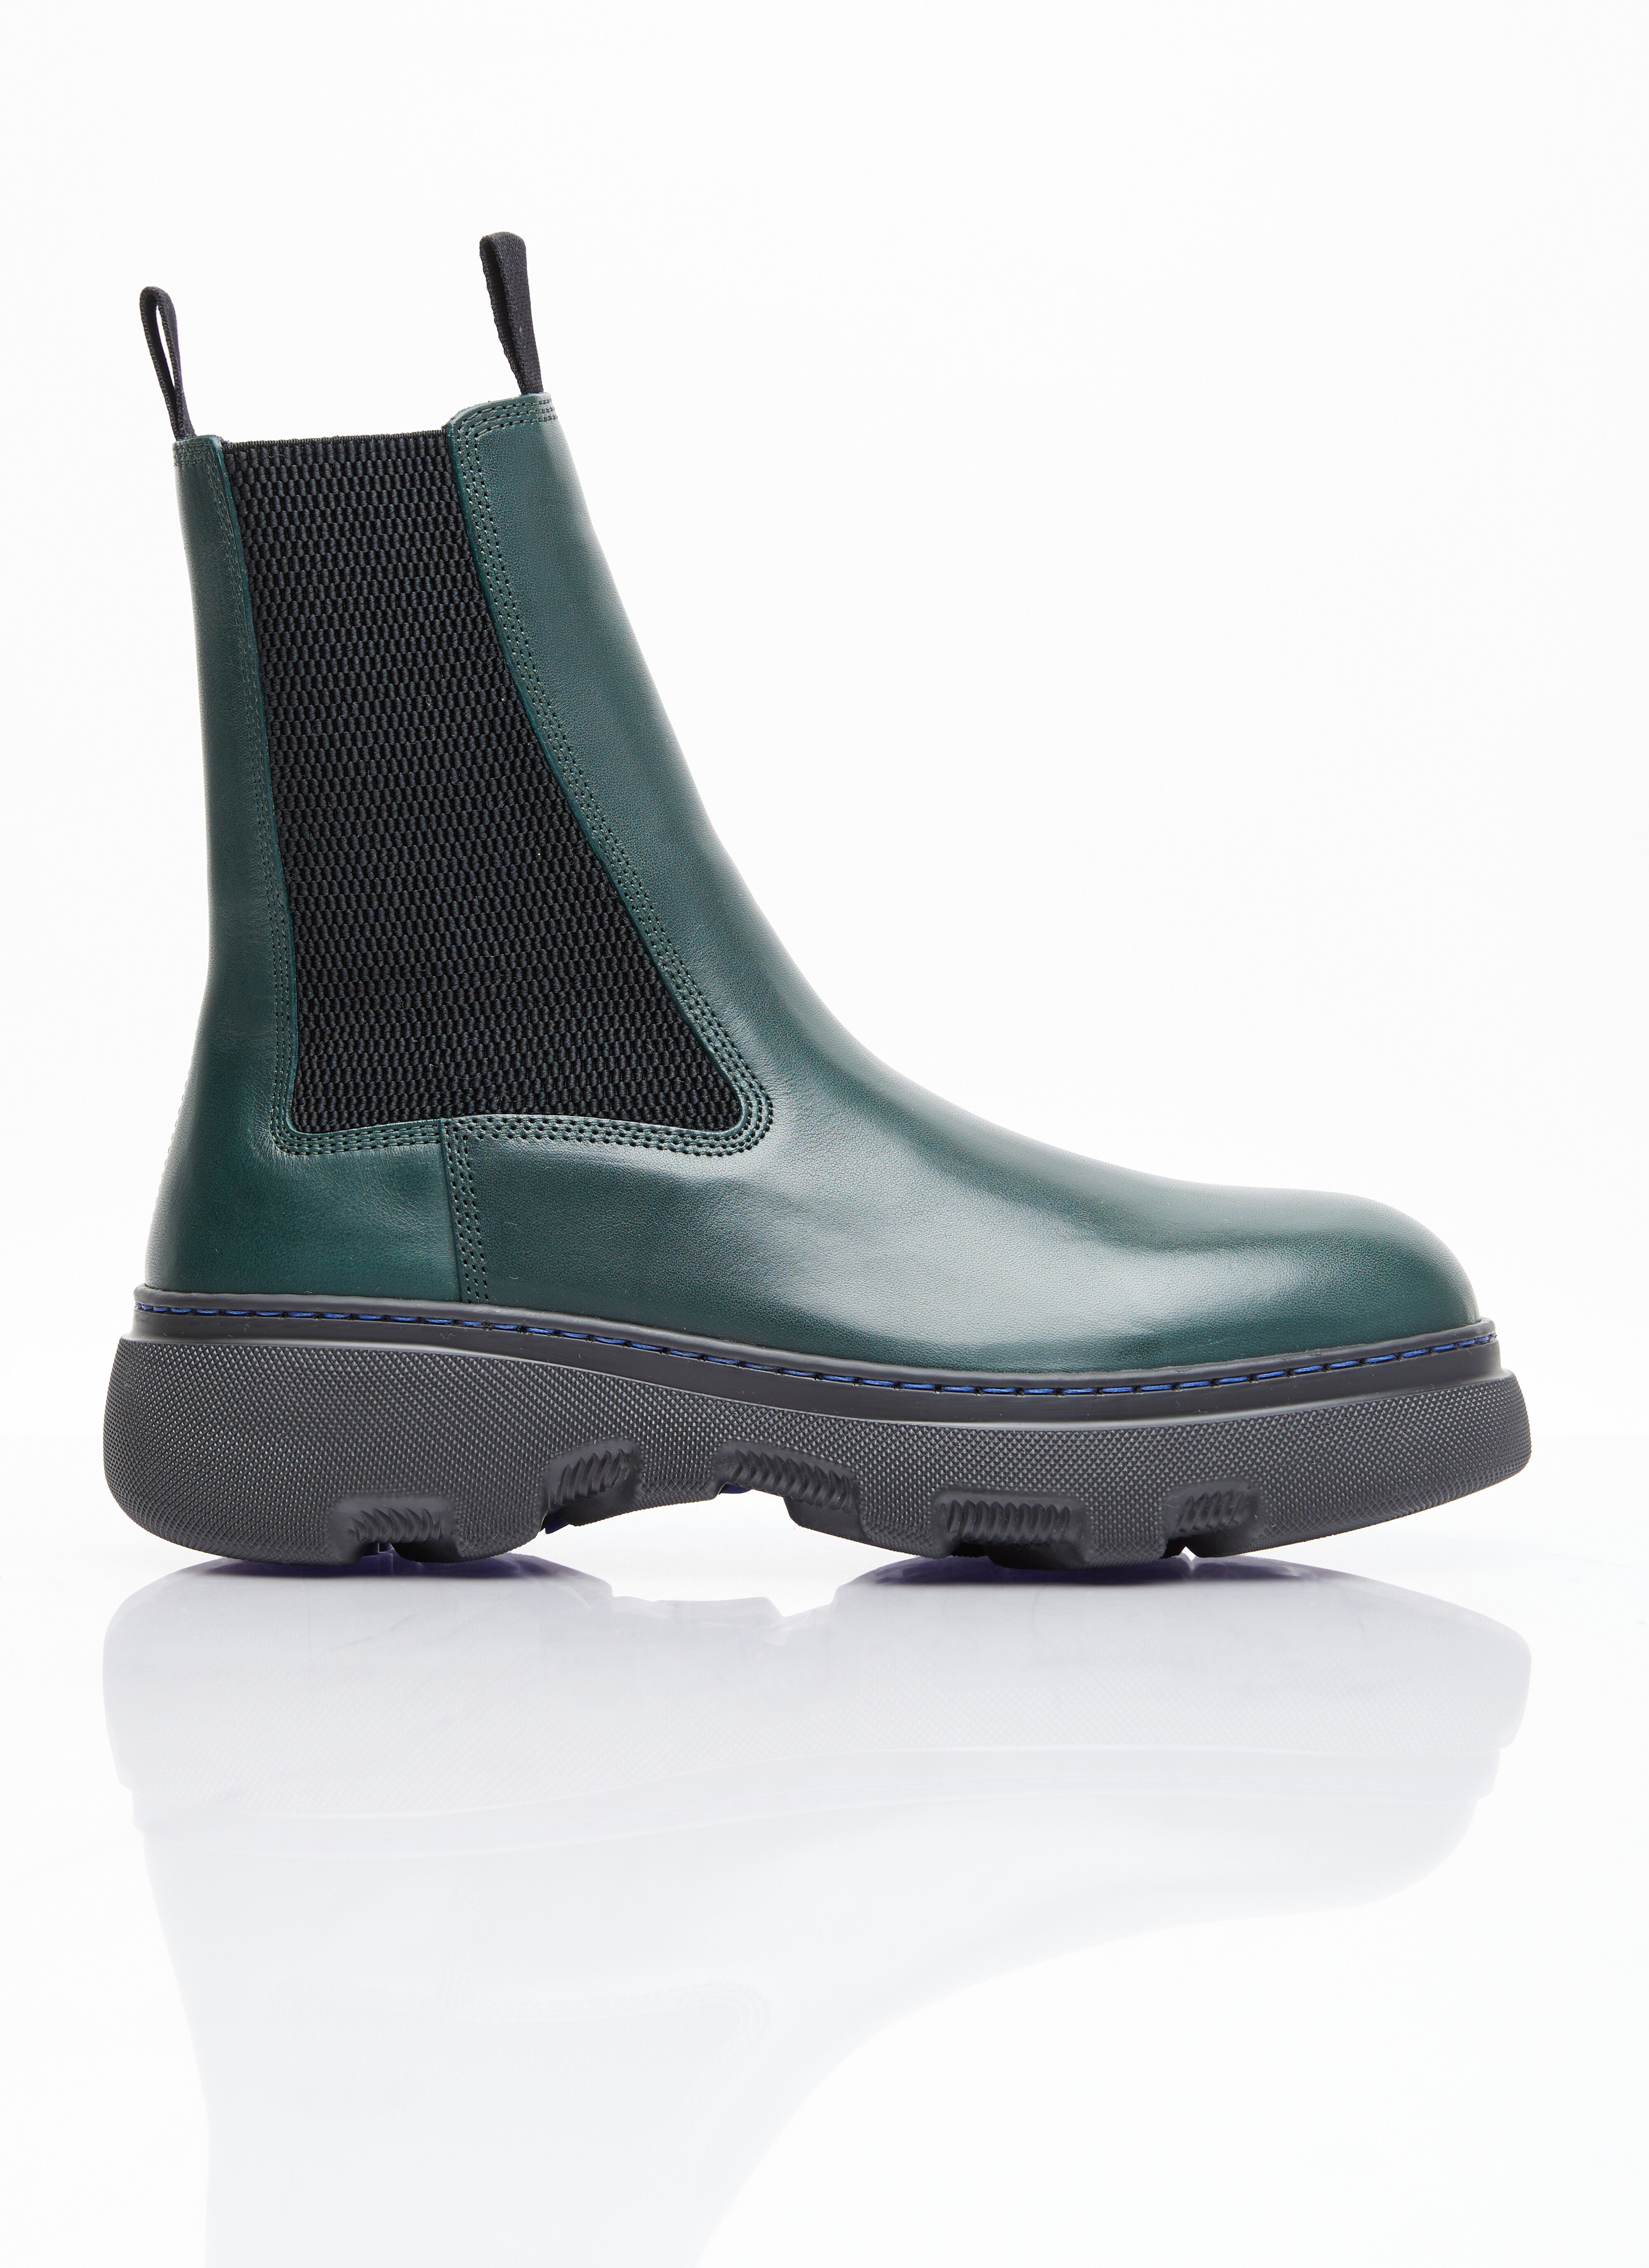 Burberry Leather Creeper Chelsea Boots Green bur0155040